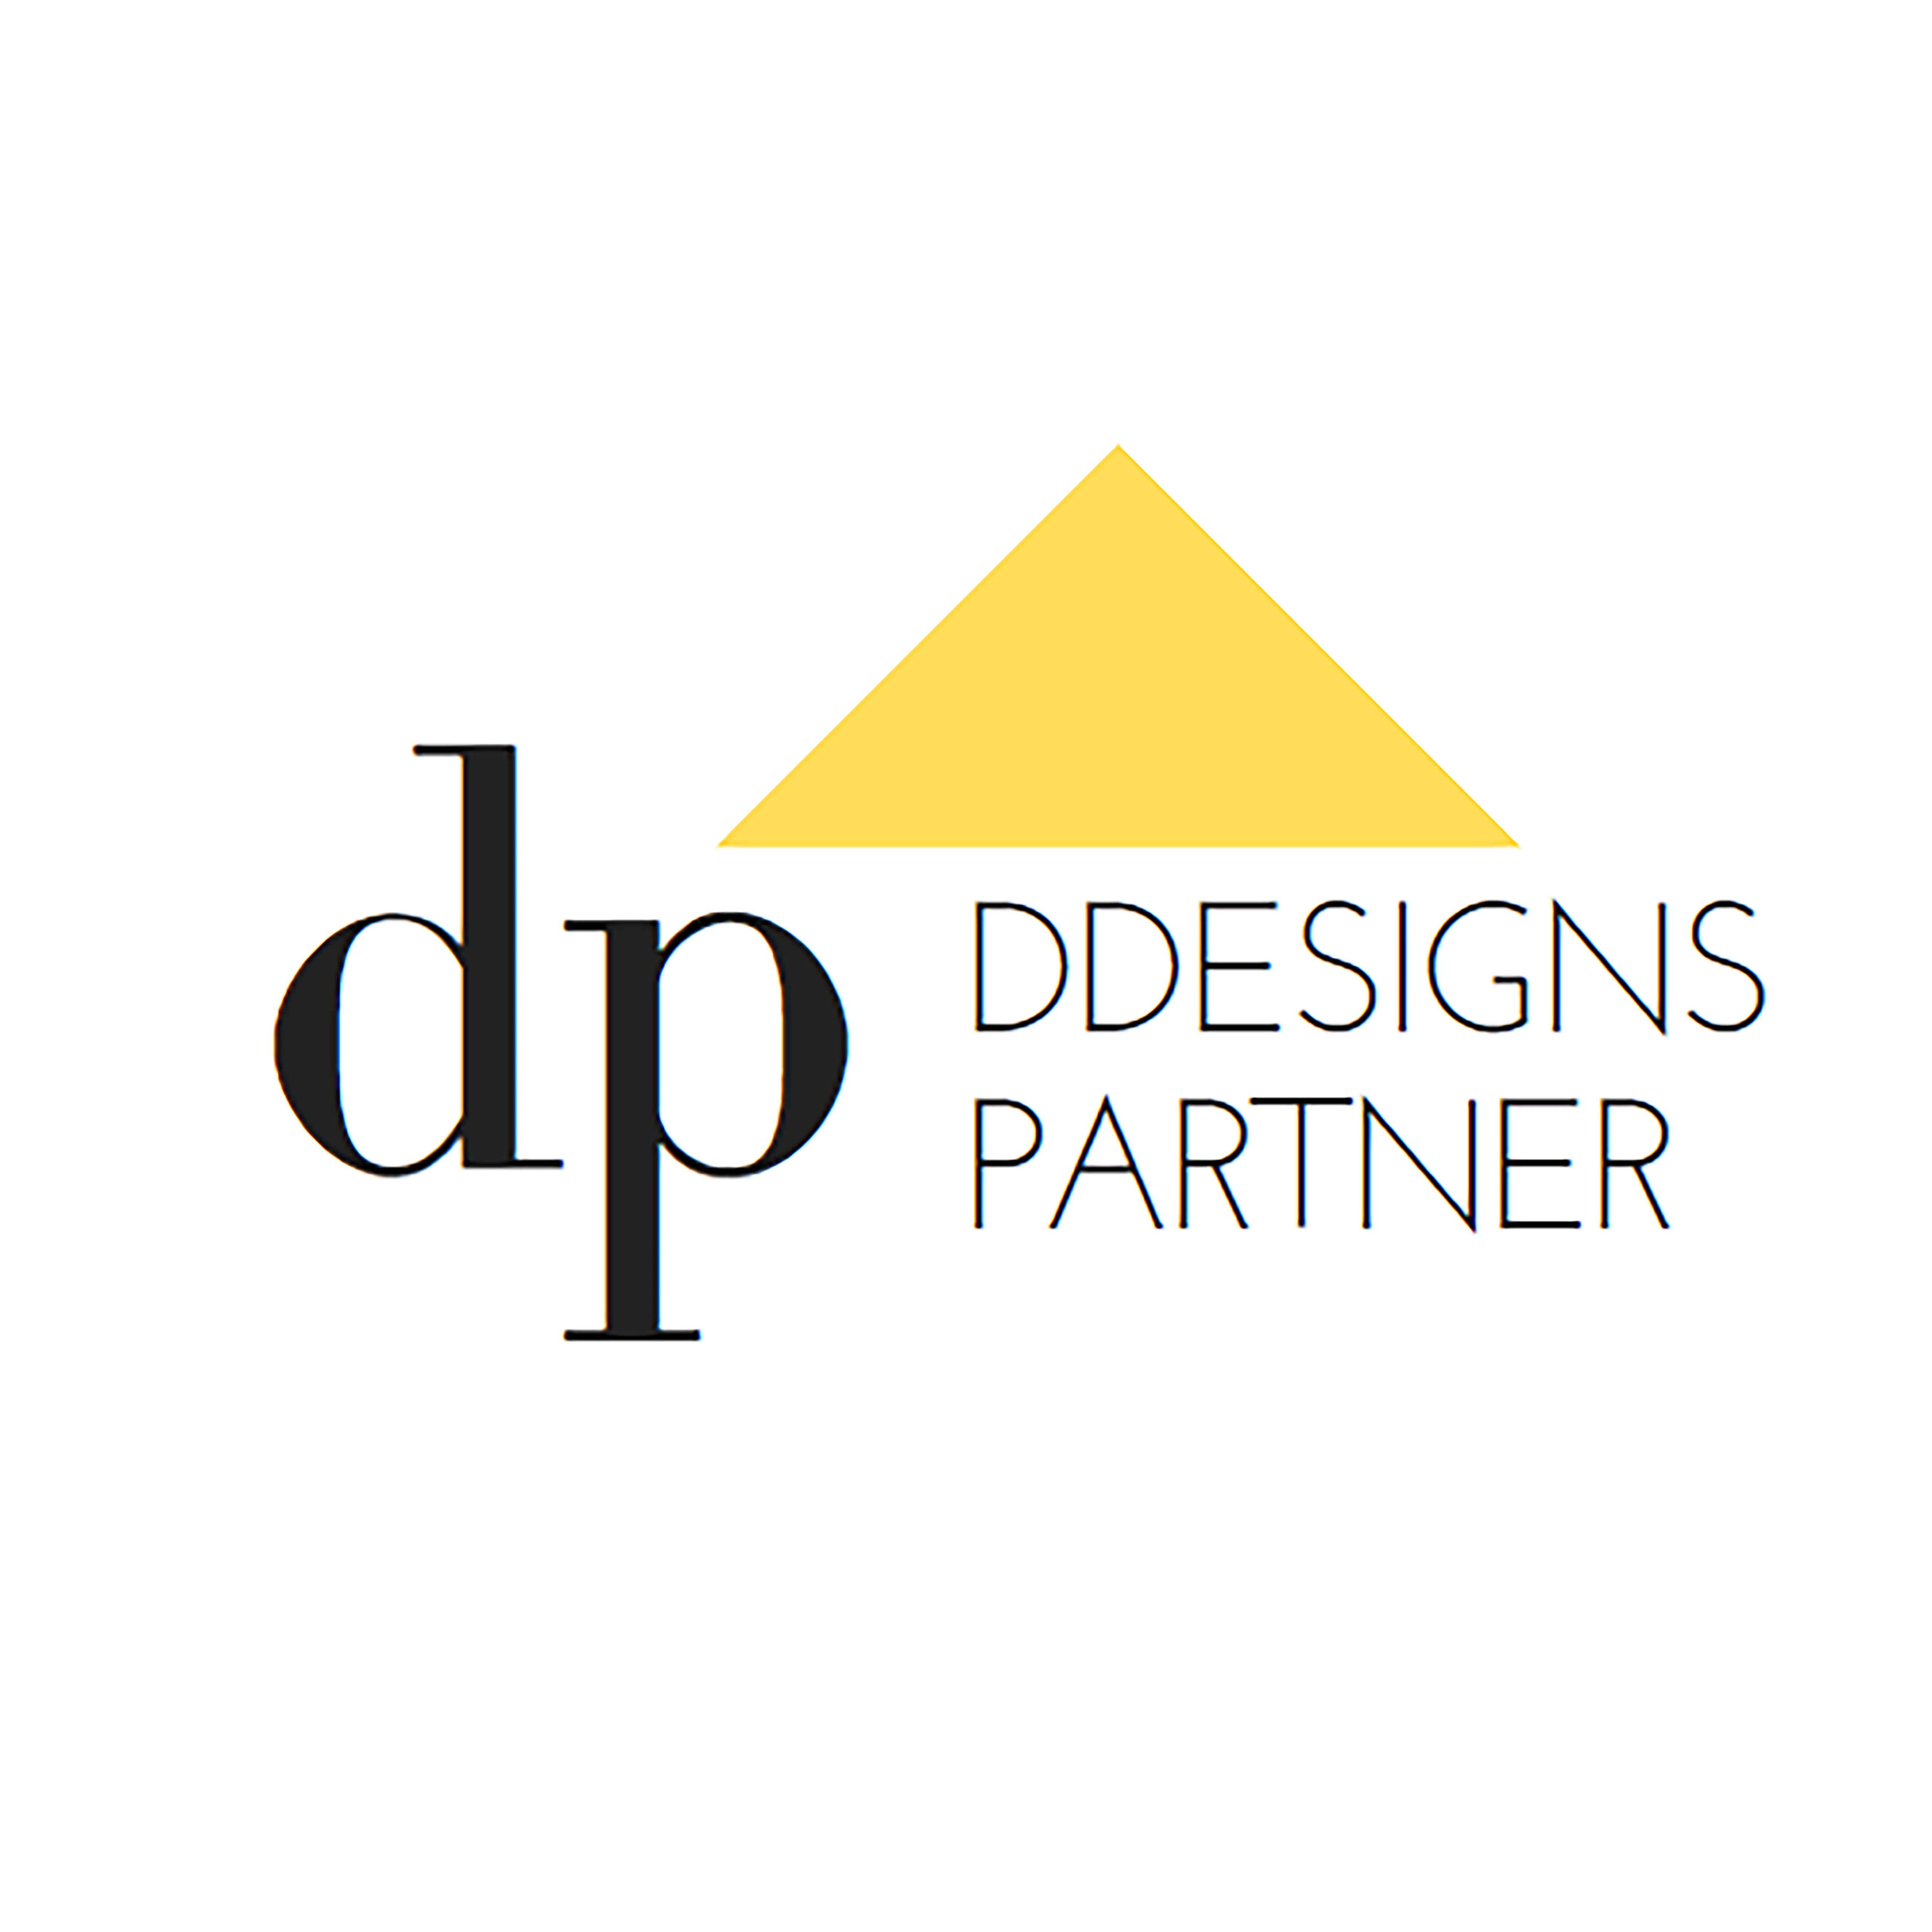 DDESIGNS PARTNER|Architect|Professional Services